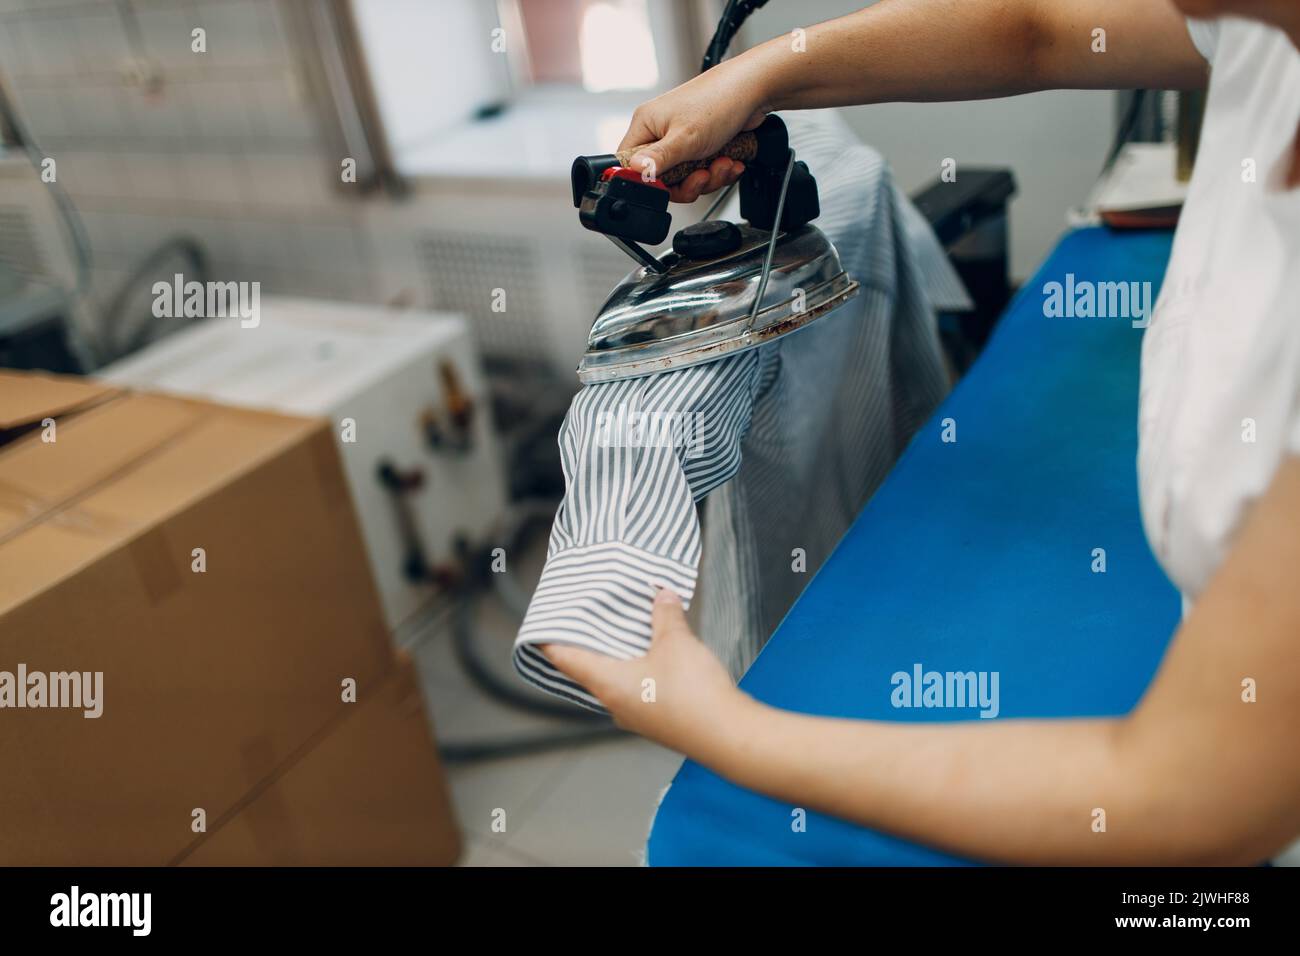 Dry cleaning ironing clothes. Clean cloth chemical process. Laundry industrial dry-cleaning. Stock Photo